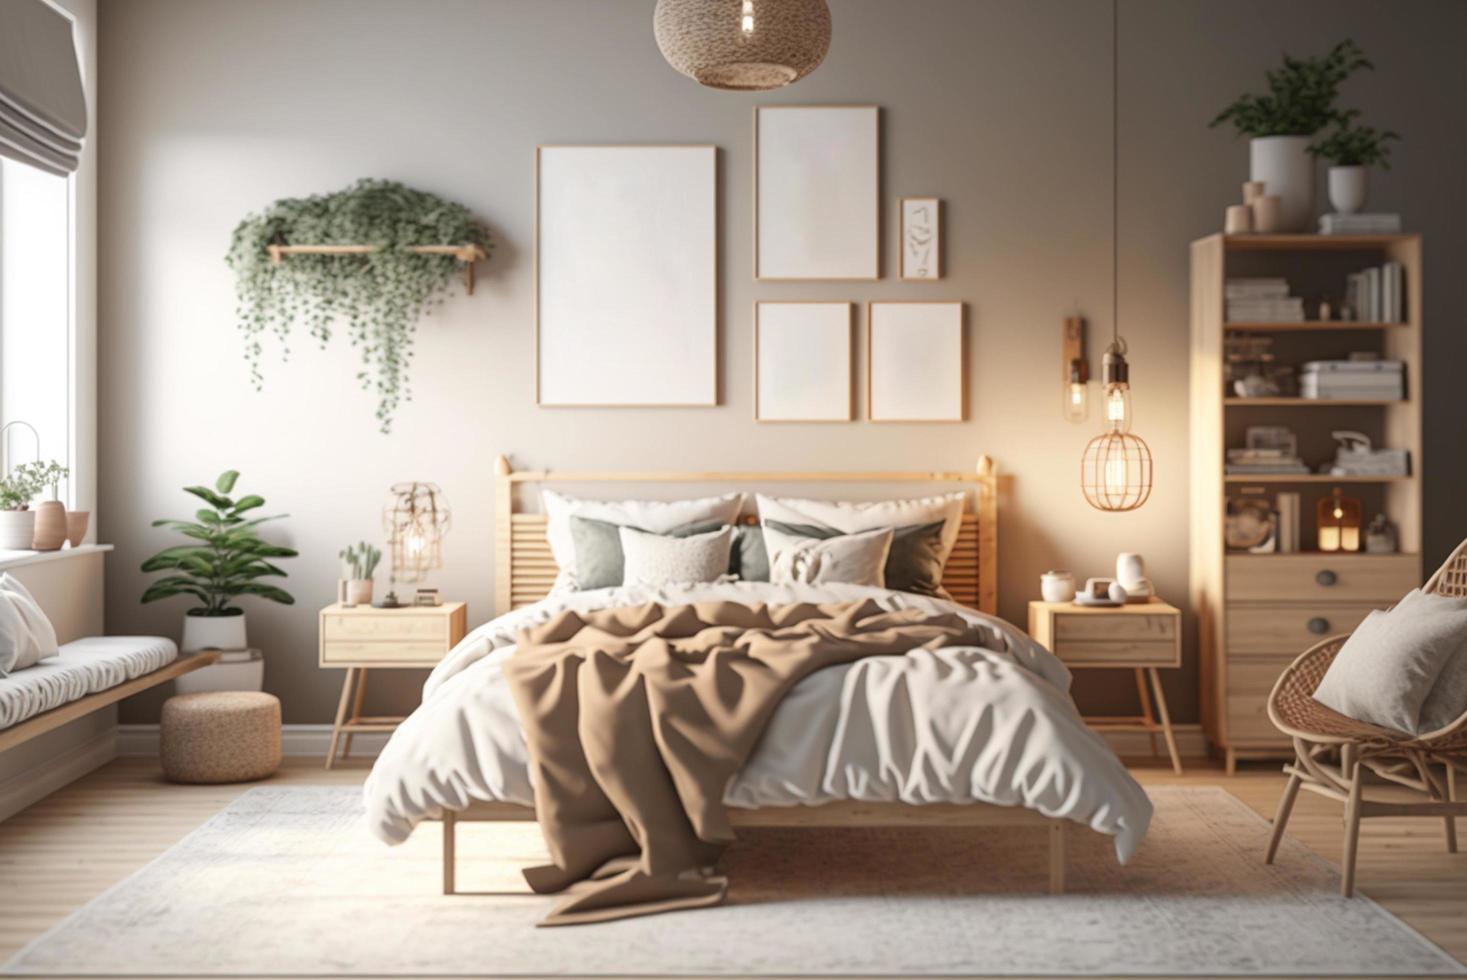 Scandinavian style bedroom mockup with natural wood furniture and a ...